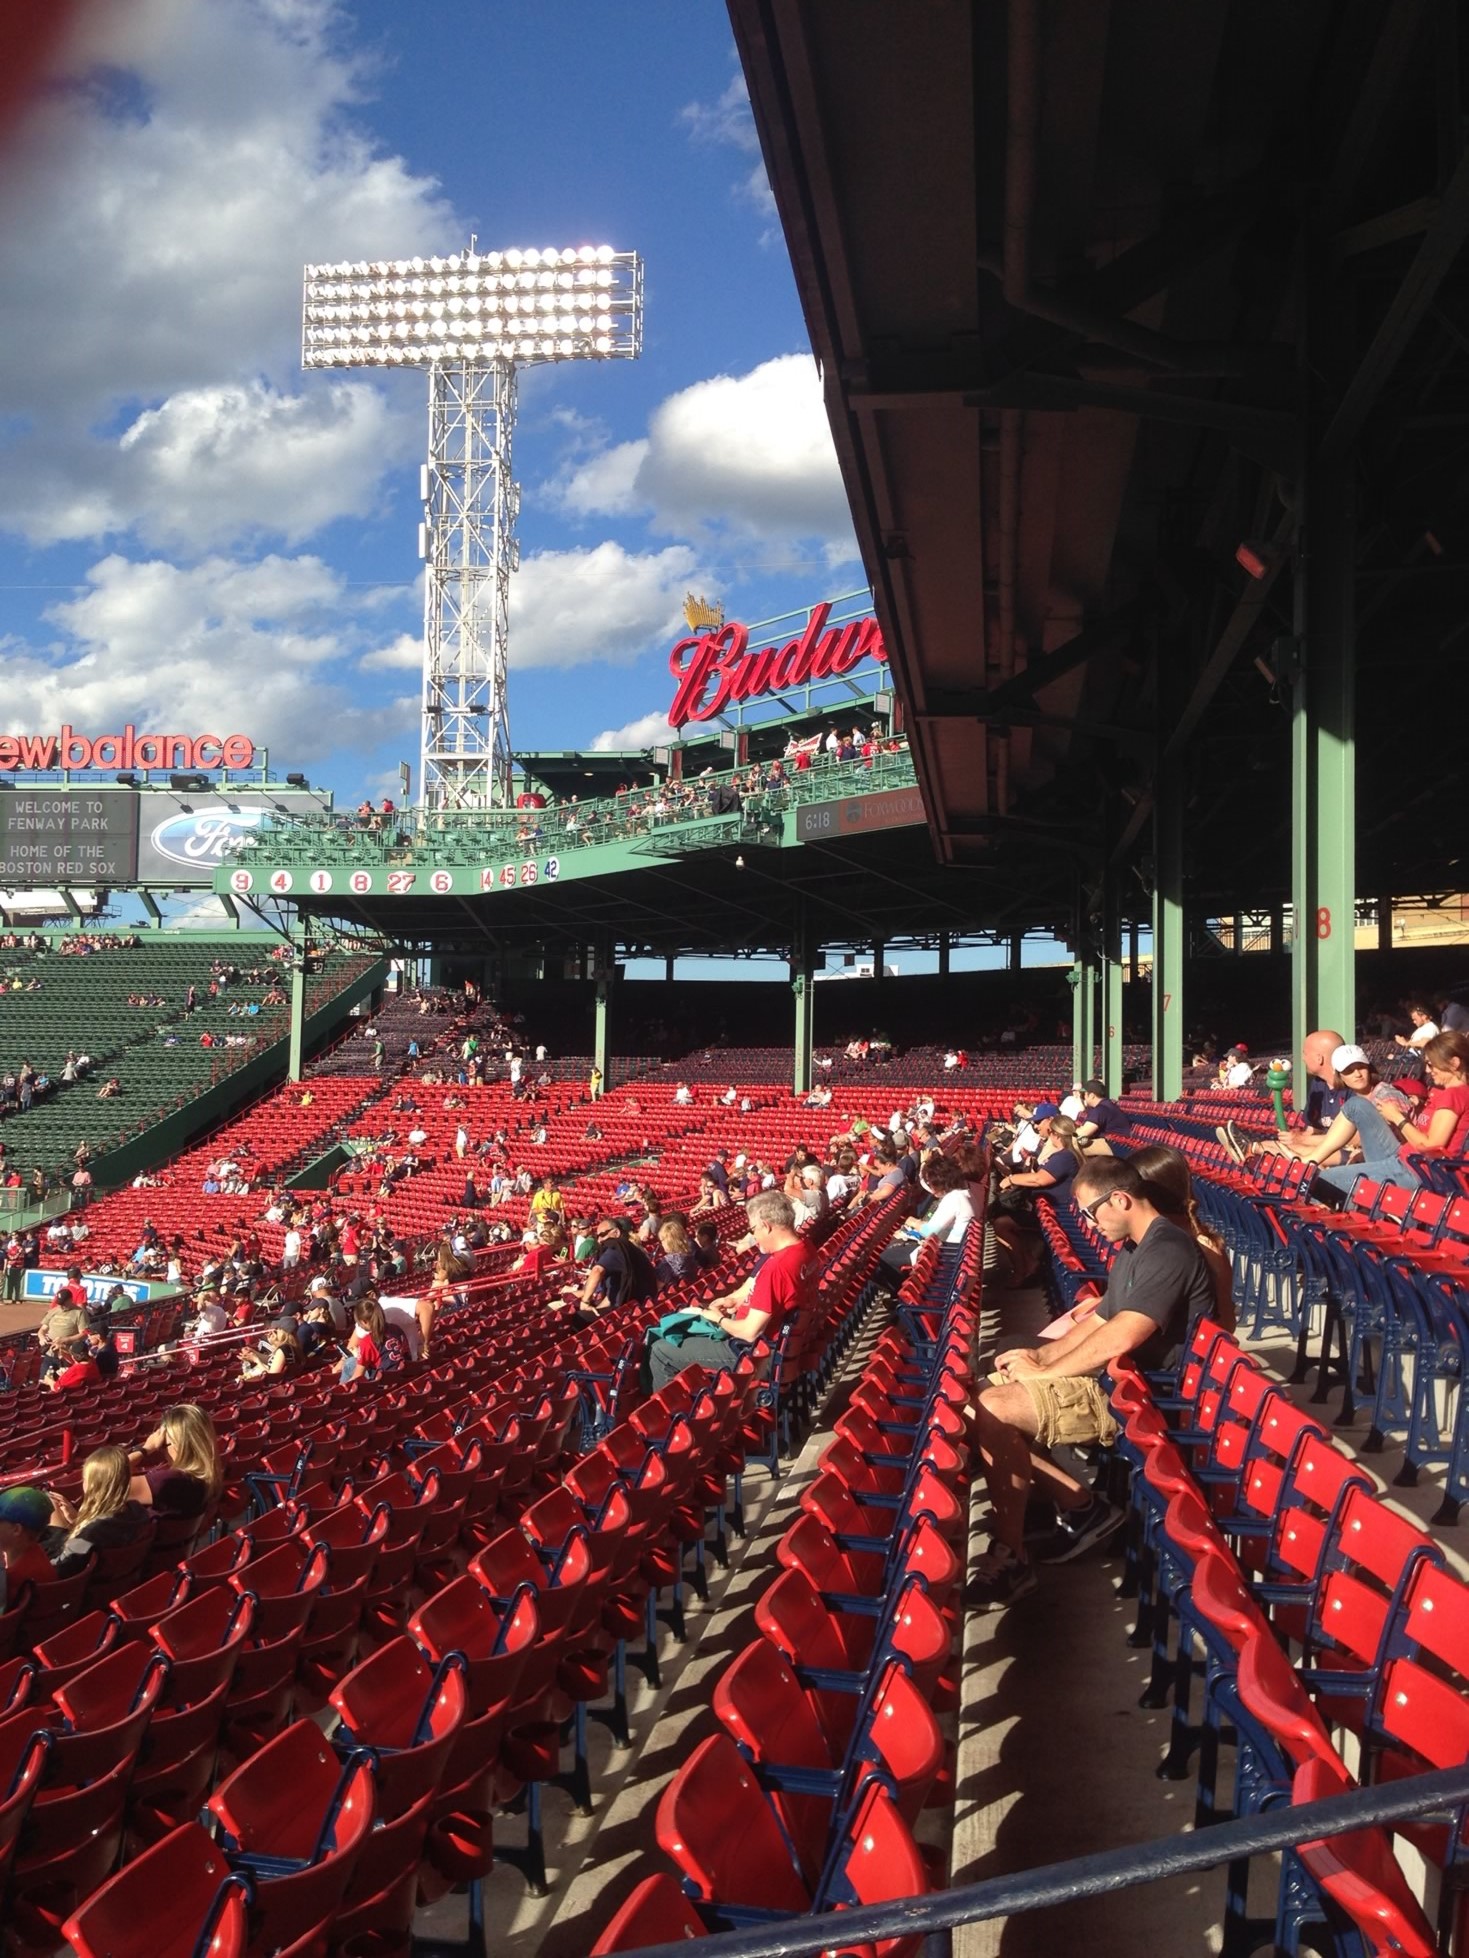 Red Sox Seating Chart Obstructed View Elcho Table